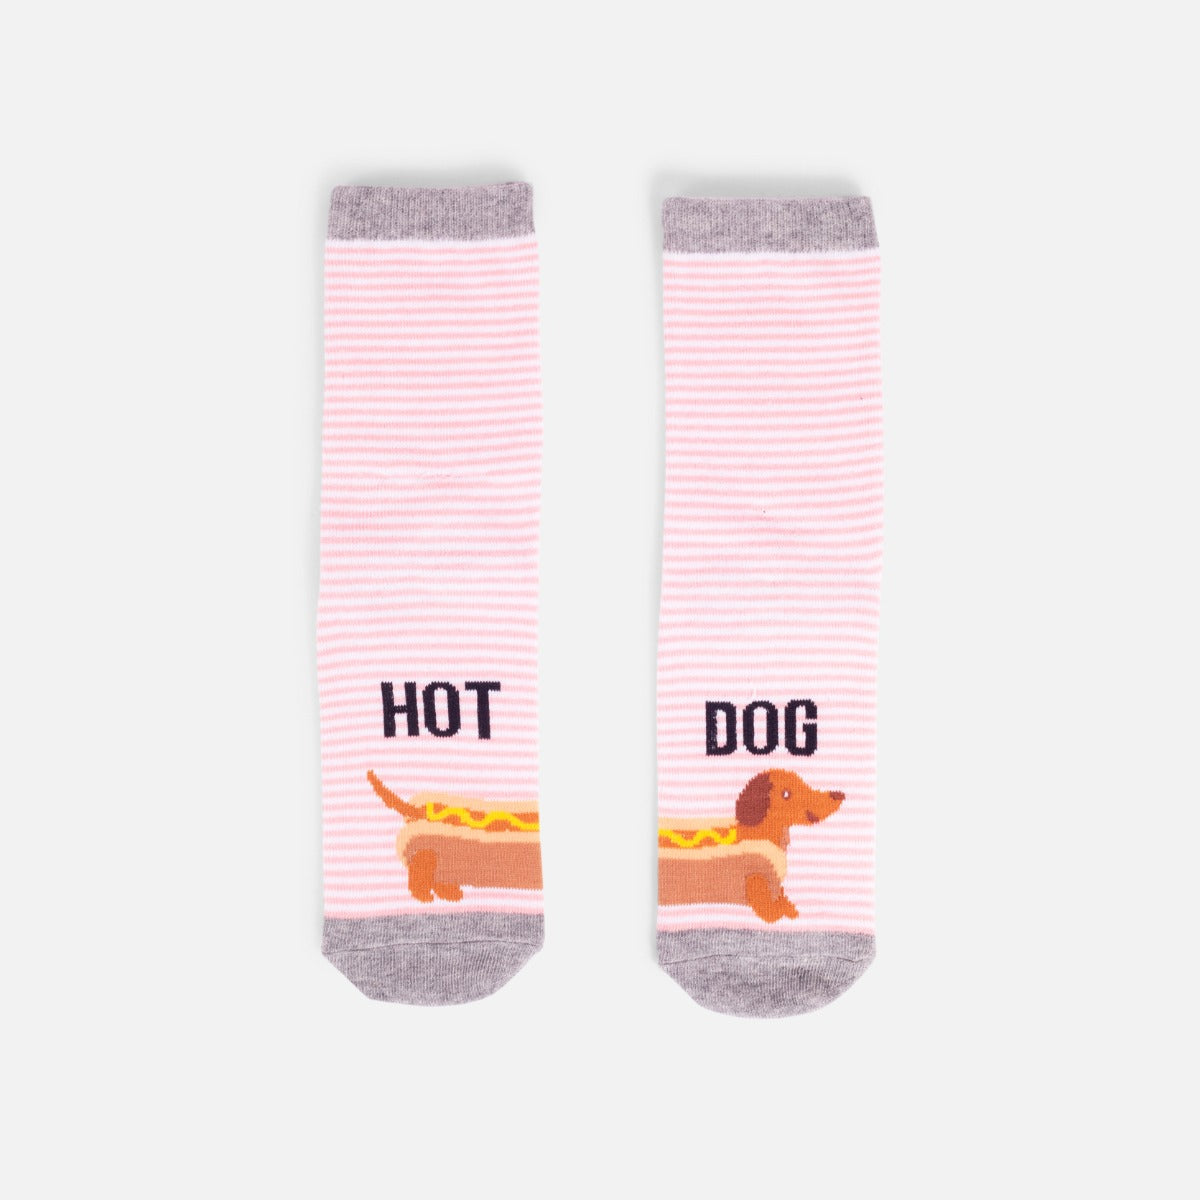 Socks duo with stripes and dachshund dogs